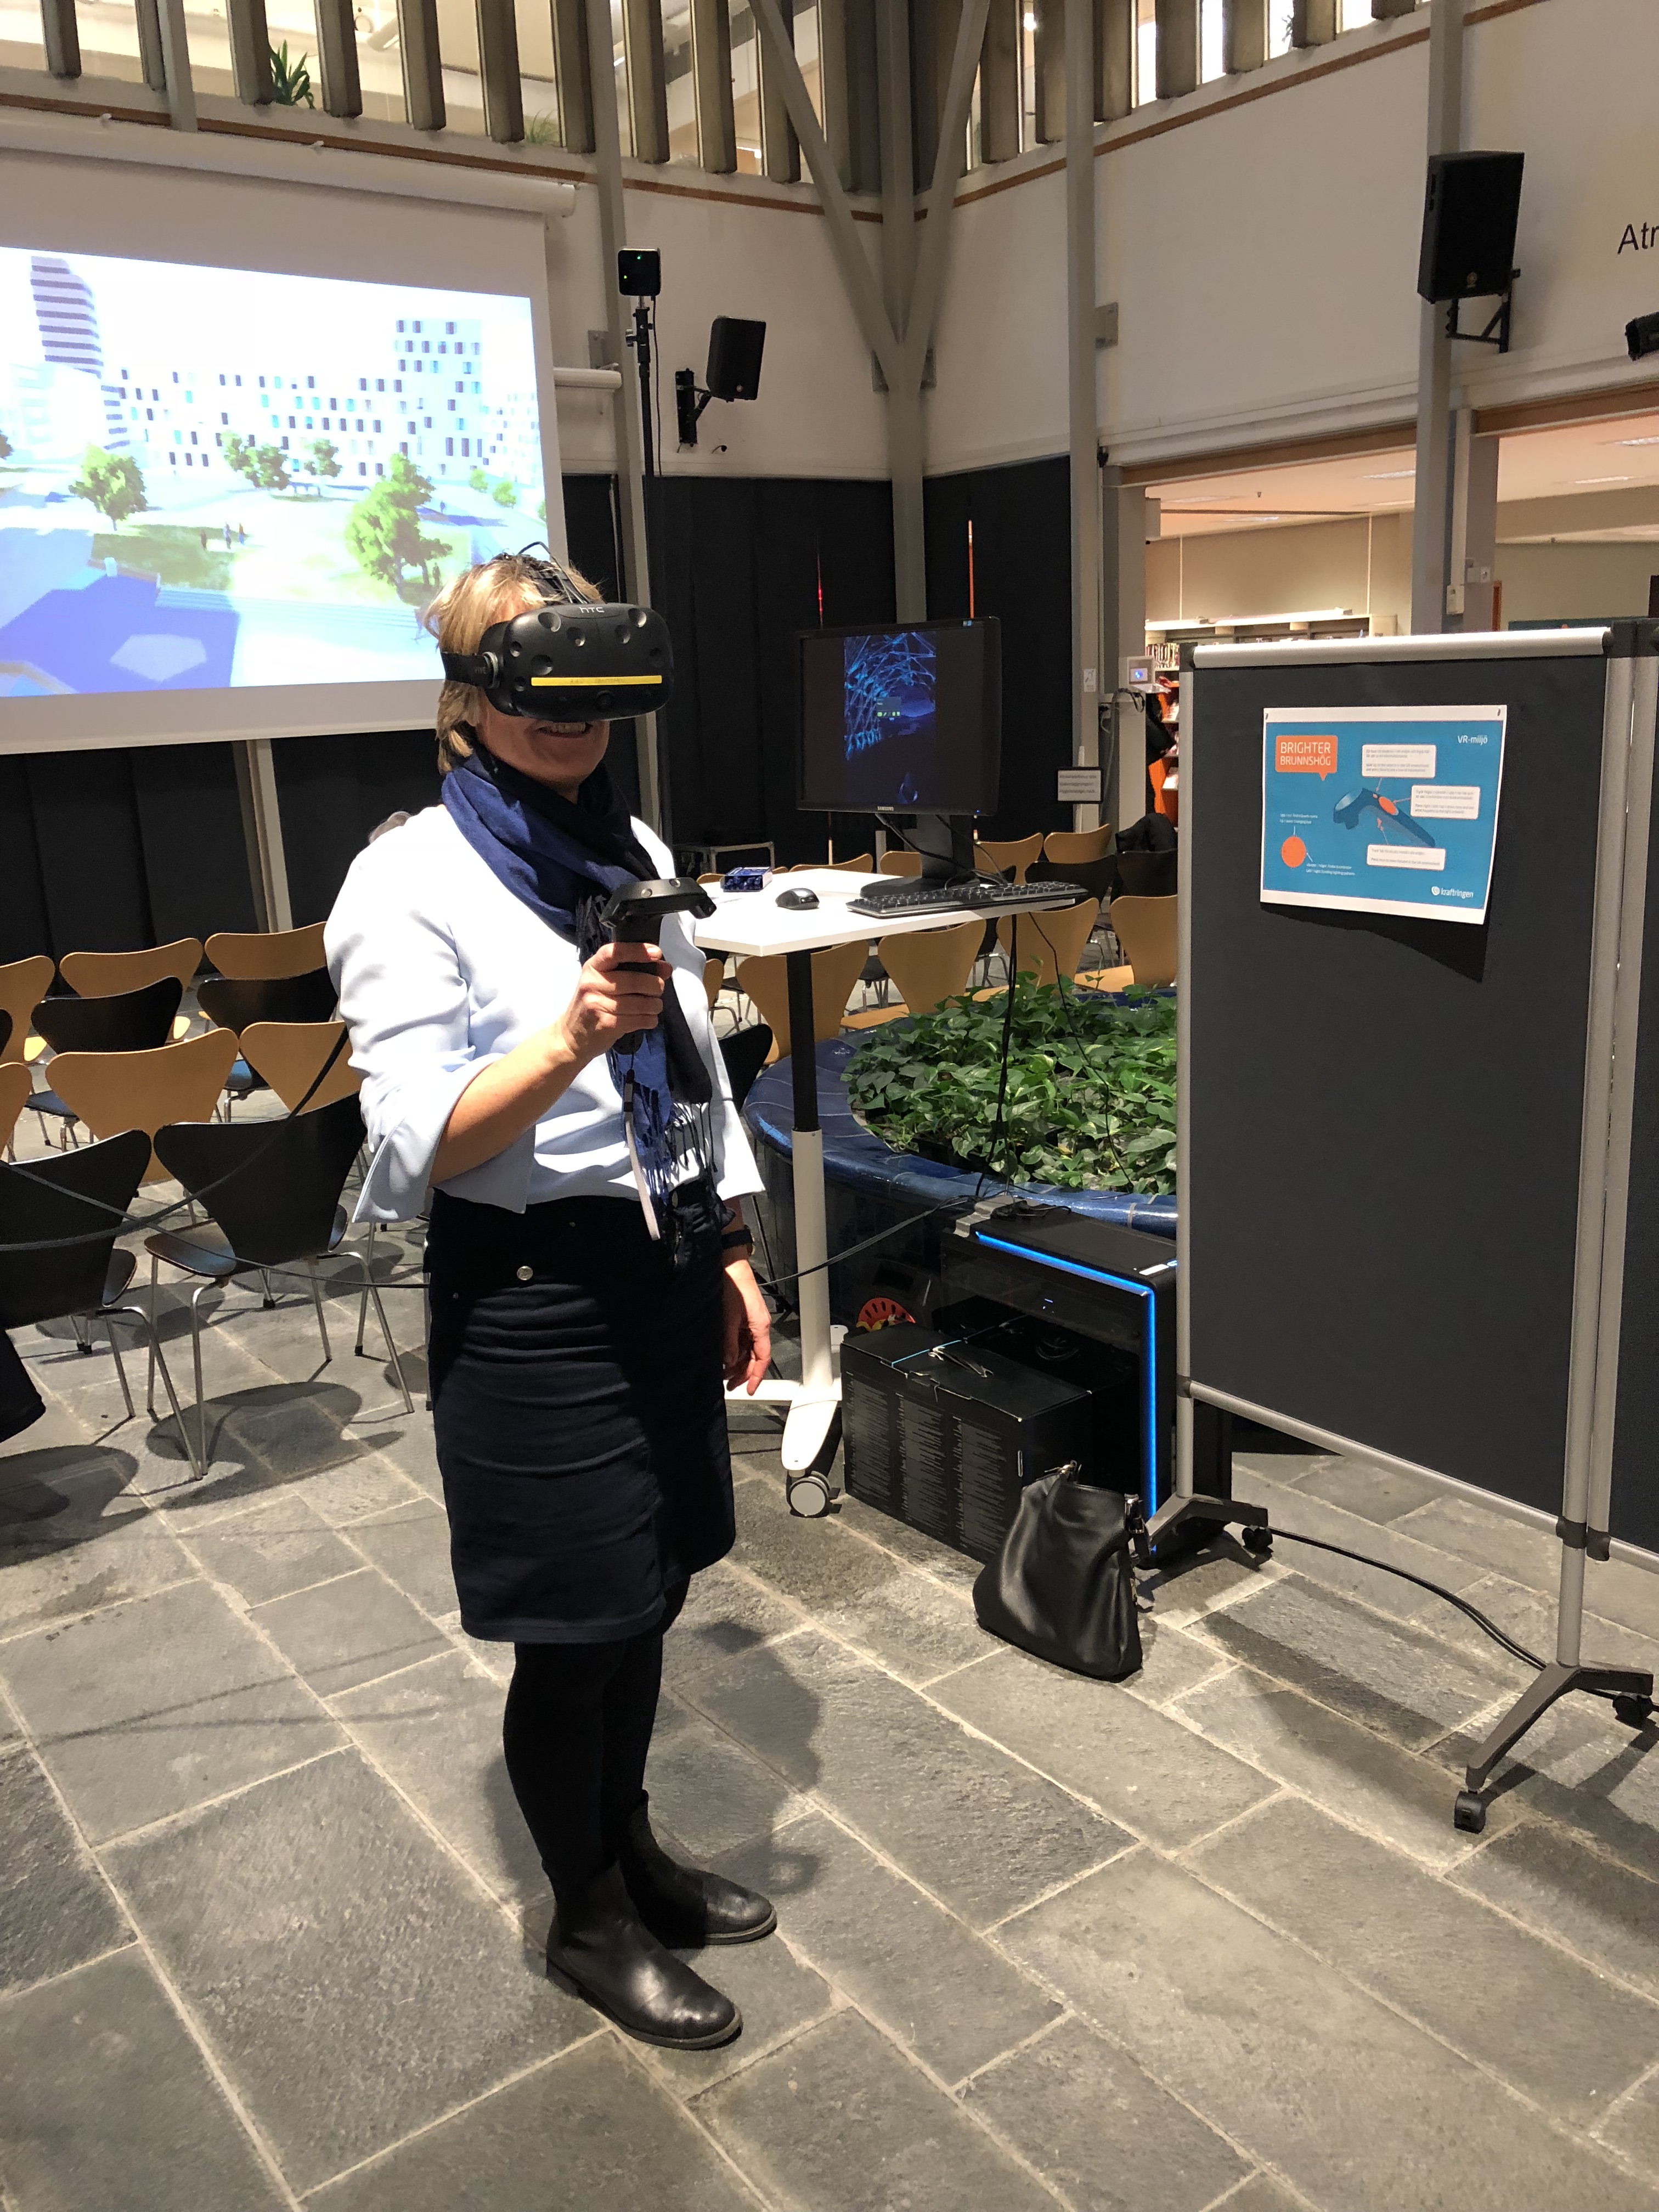 Brighter Brunnshög: Experiencing the future with Virtual Reality